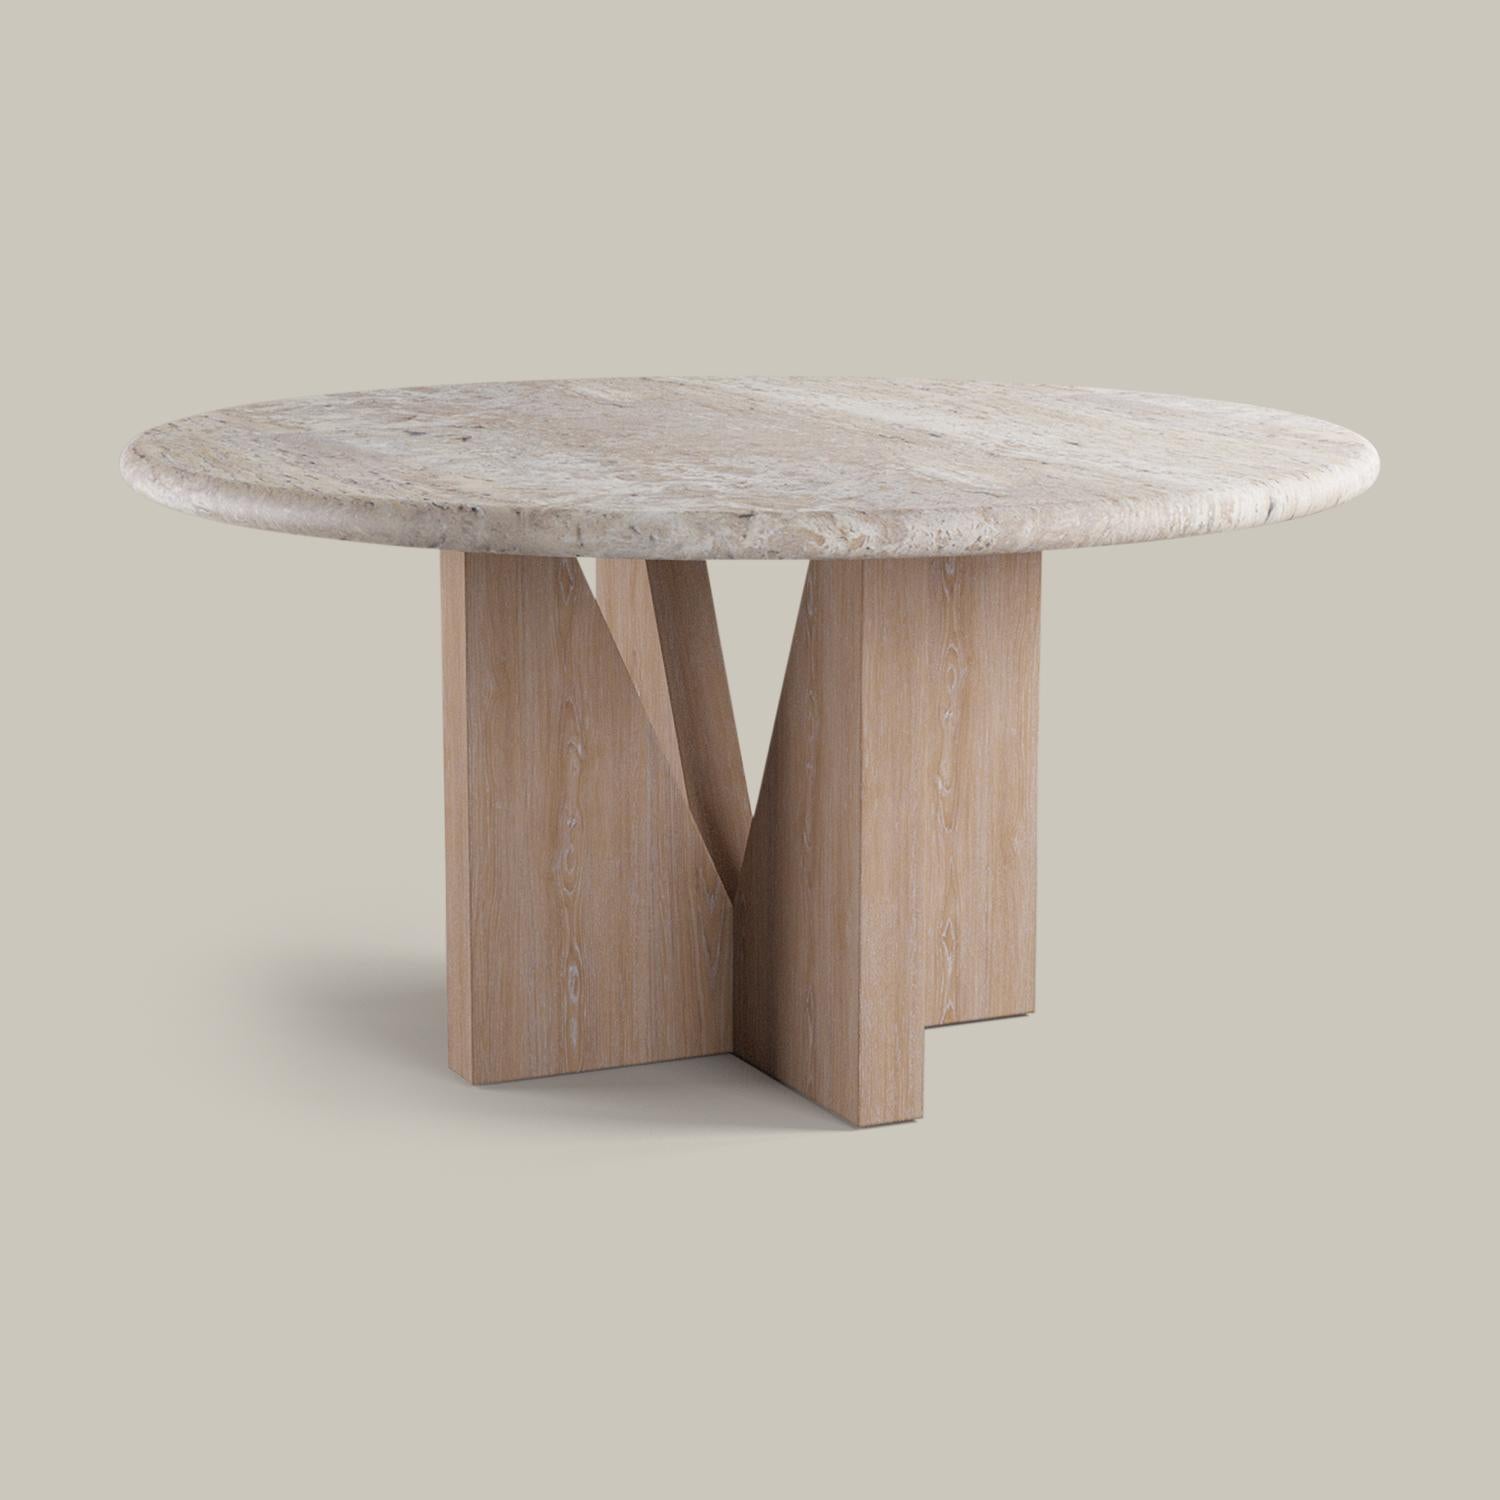 A honed natural travertine surface rests atop an angular cerused European oak base to form a clean, minimalist dining table. The sculptural opening allows air and light to flow through the base.